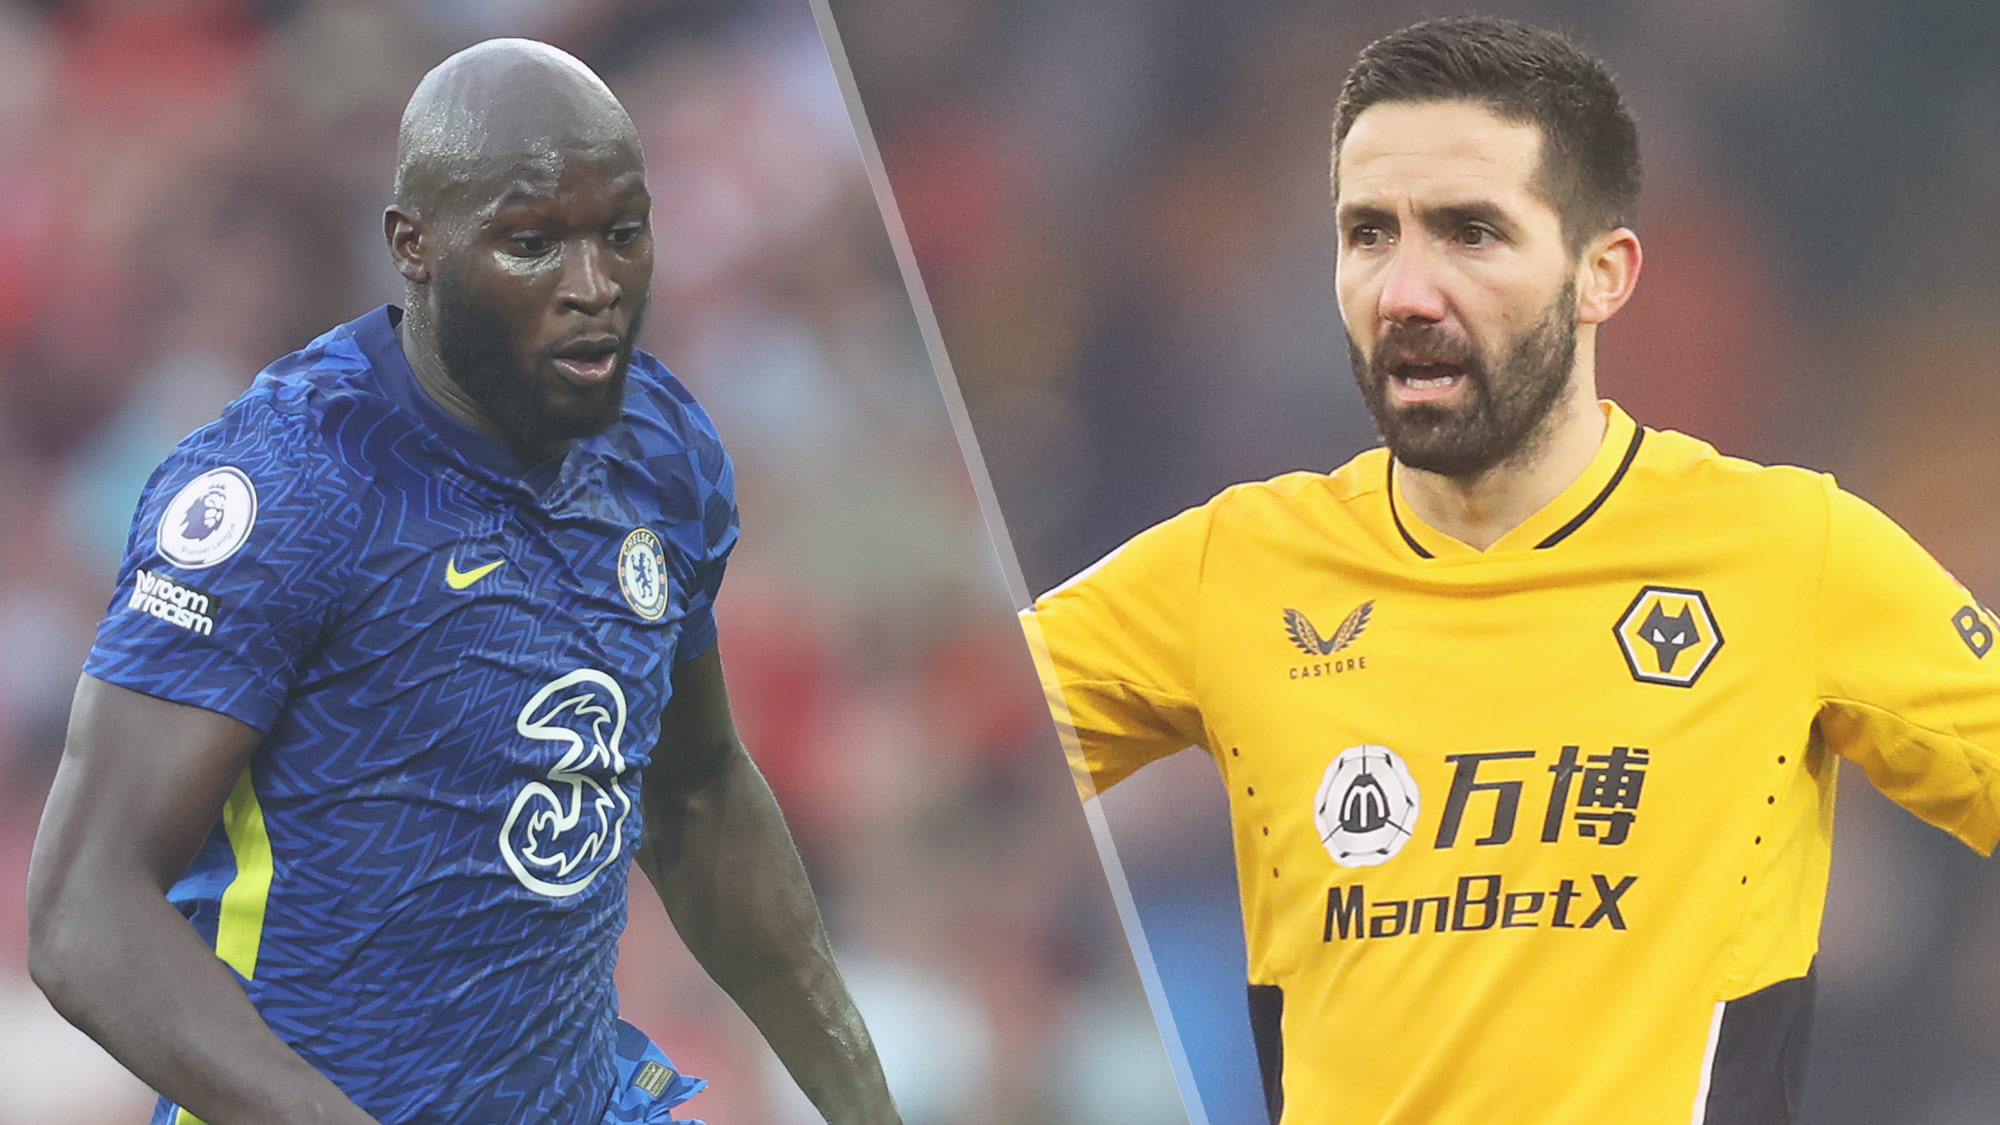 Chelsea's Romelu Lukaku and Wolves' Joao Moutinho are both available to appear on the Chelsea v Wolves live stream.